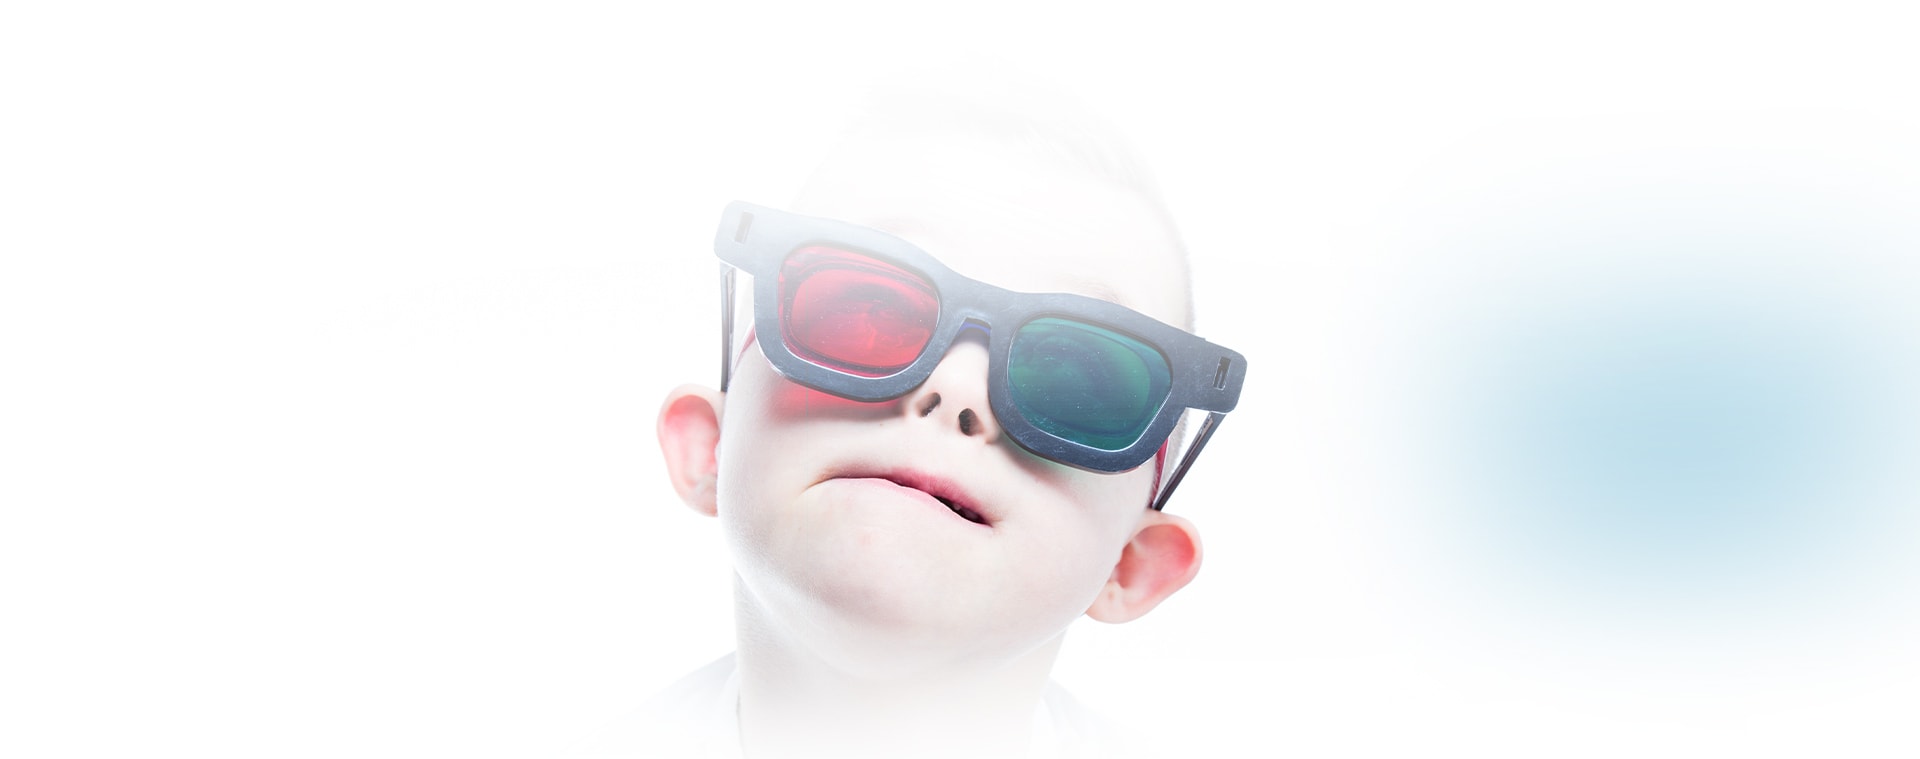 Child with coloured glasses getting eye exam